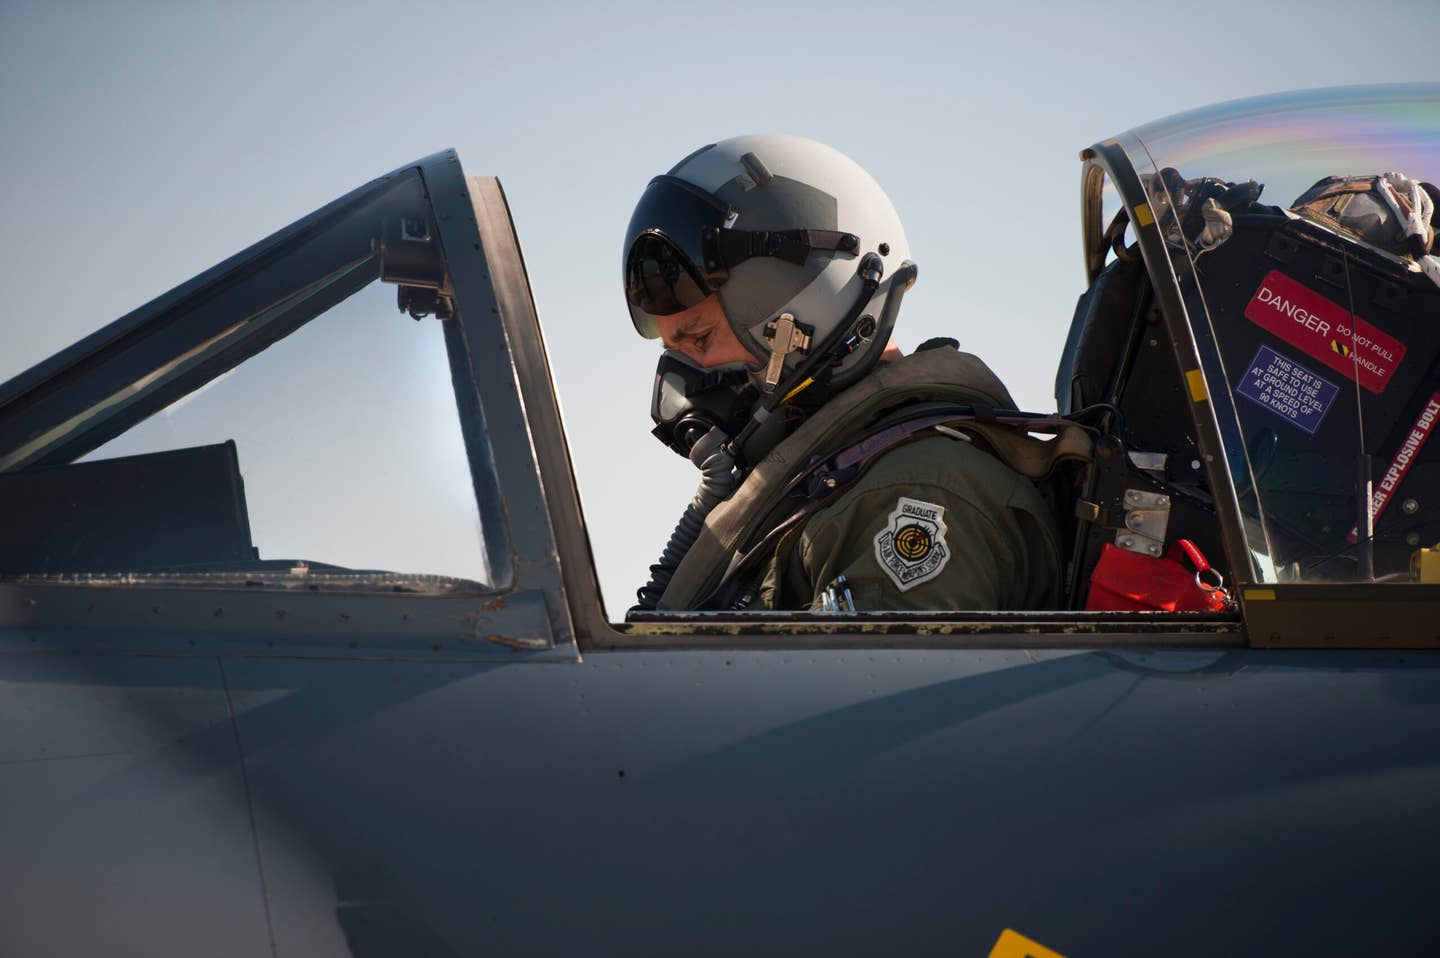 An Airborne Tactical Advantage Company pilot conducts a final instrument check in the cockpit of his Hunter. The ATAC Hunters are fitted with the Mk 3 ejection seat that was first used in 1955. <em>U.S. Air Force photo by Senior Airman Armando A. Schwier-Morales/Released</em>